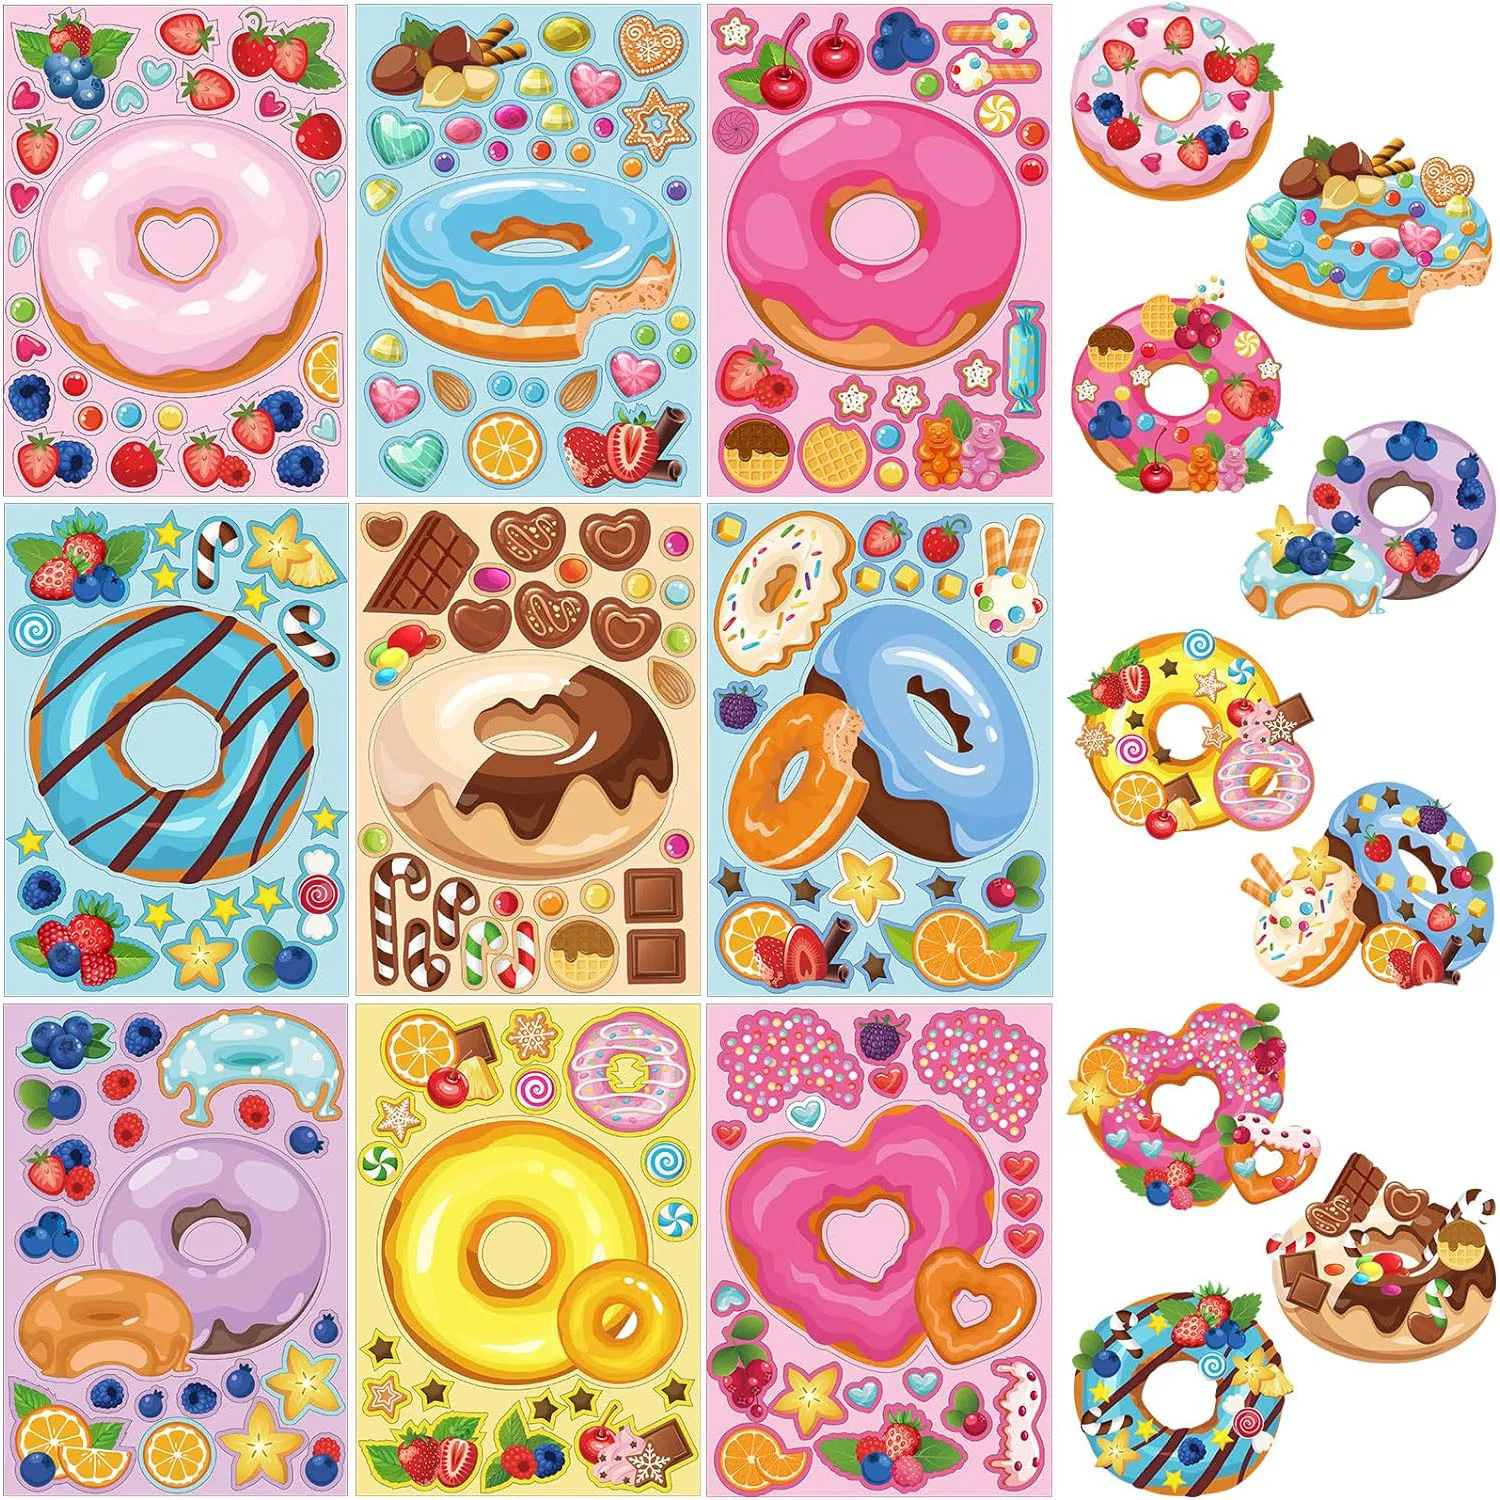 

Donut Stickers Donut Party Favors Make Your Own Stickers Doughnuts Treats and Sweets Sticker Mix and Match Stickers for Kids